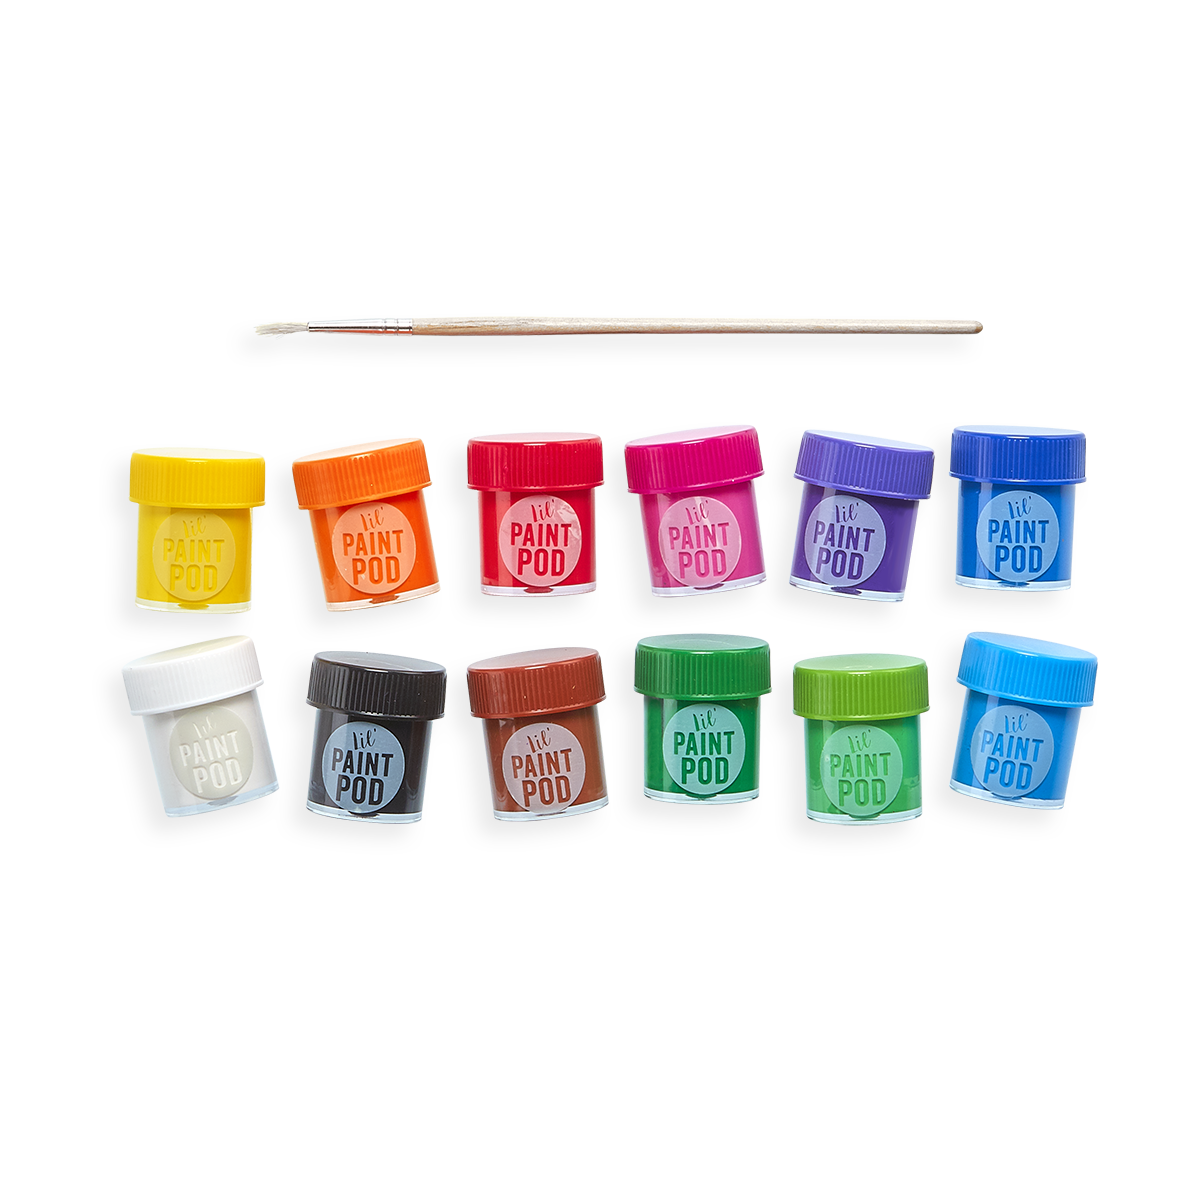 Poster Paint w/ Brush 6 Colors - Wholesale Price for Kid's Paints